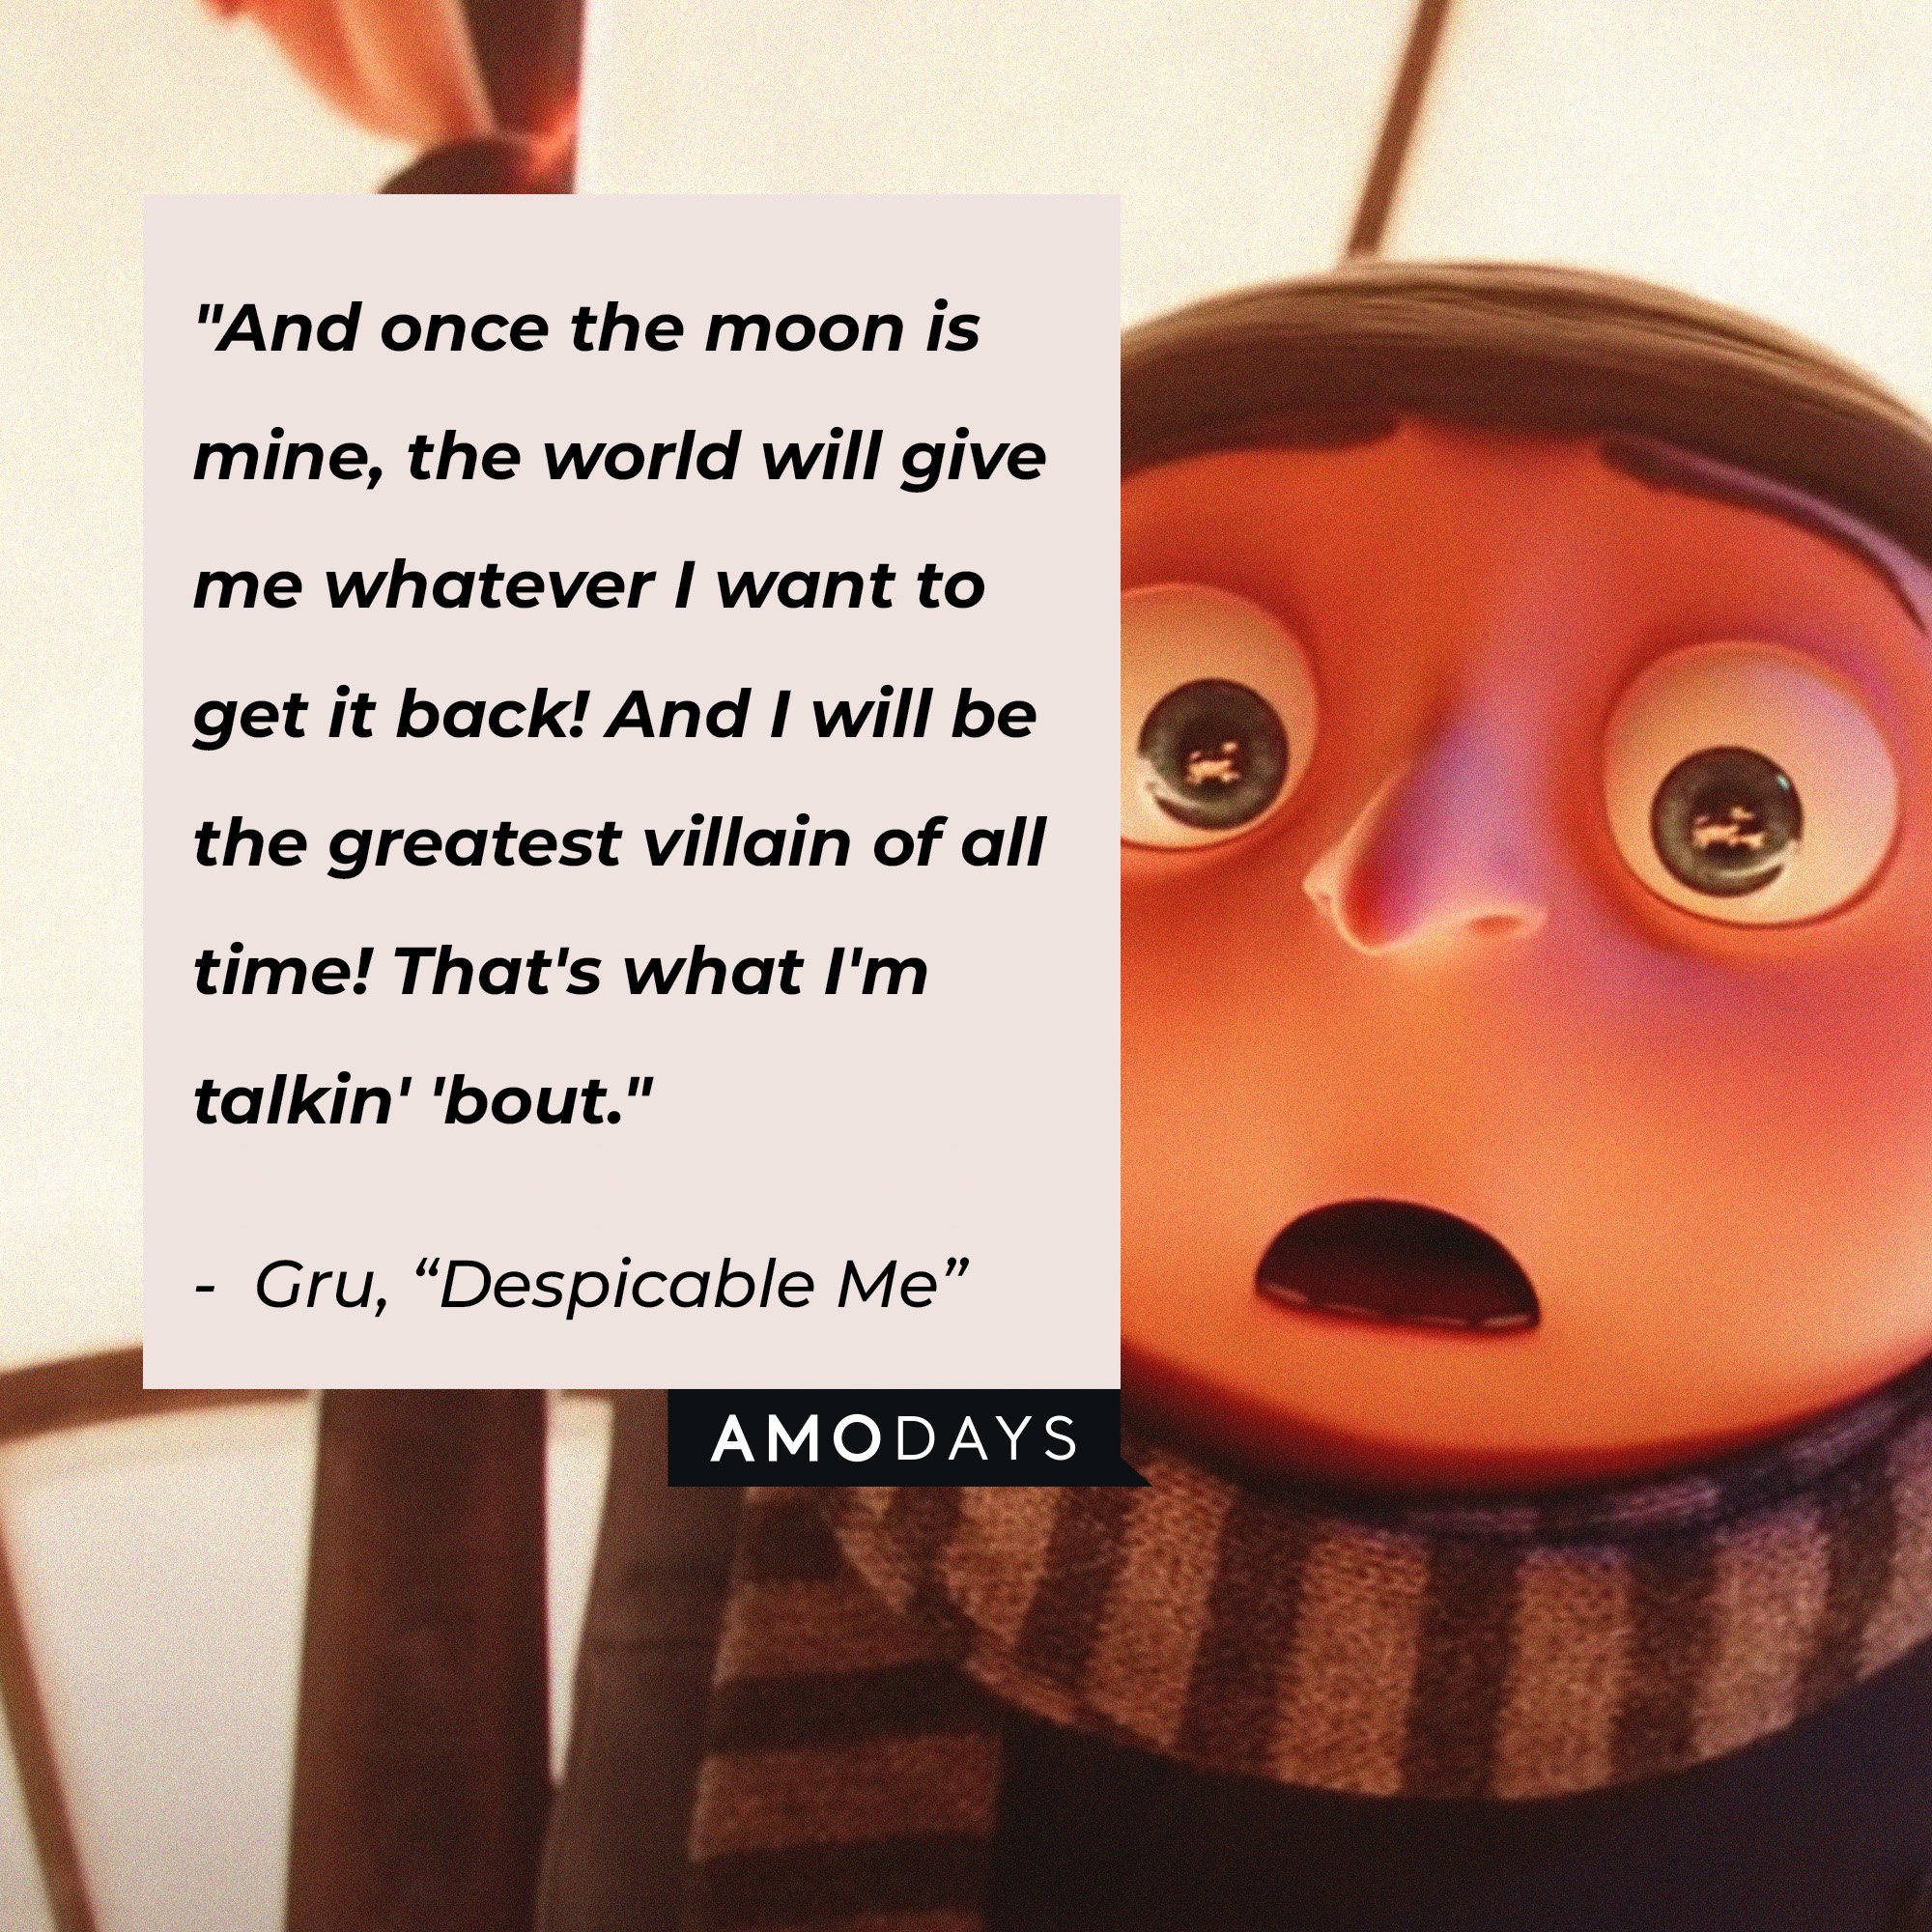 Gru's quote: "And once the moon is mine, the world will give me whatever I want to get it back! And I will be the greatest villain of all time! That's what I'm talkin' 'bout." | Image: AmoDays